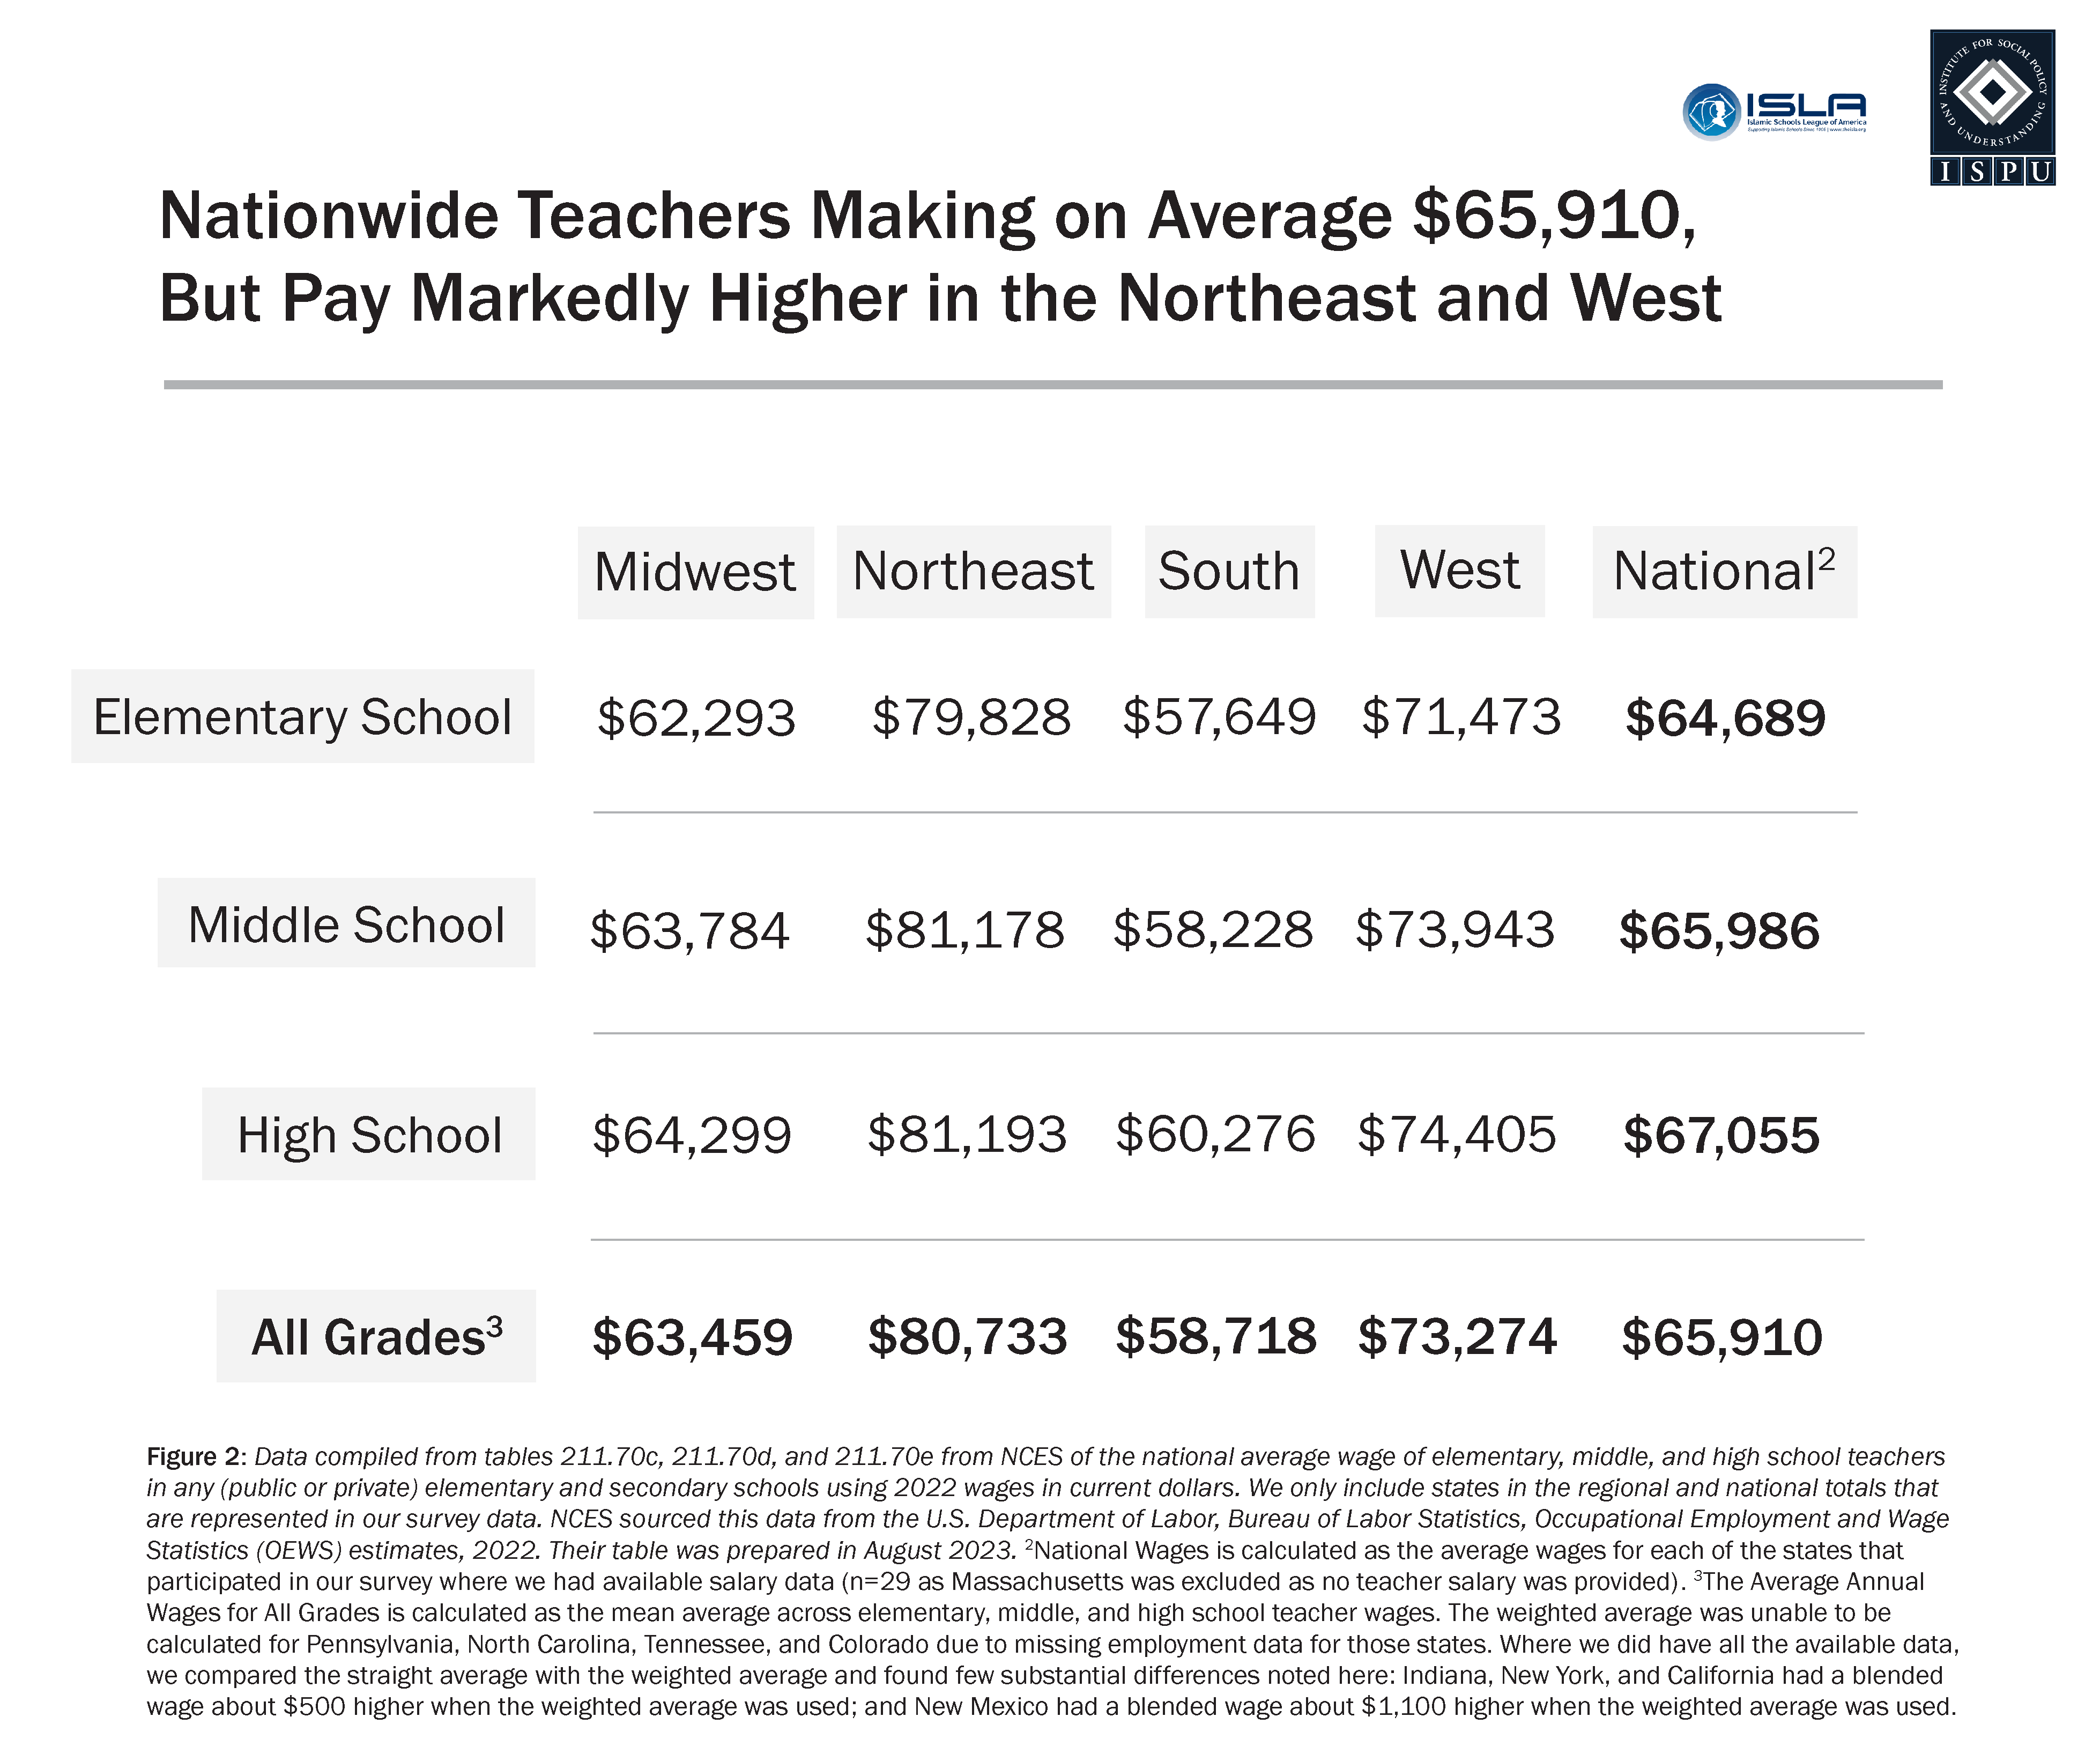 A table showing the average regional and national annual wages of teachers by grade and overall.